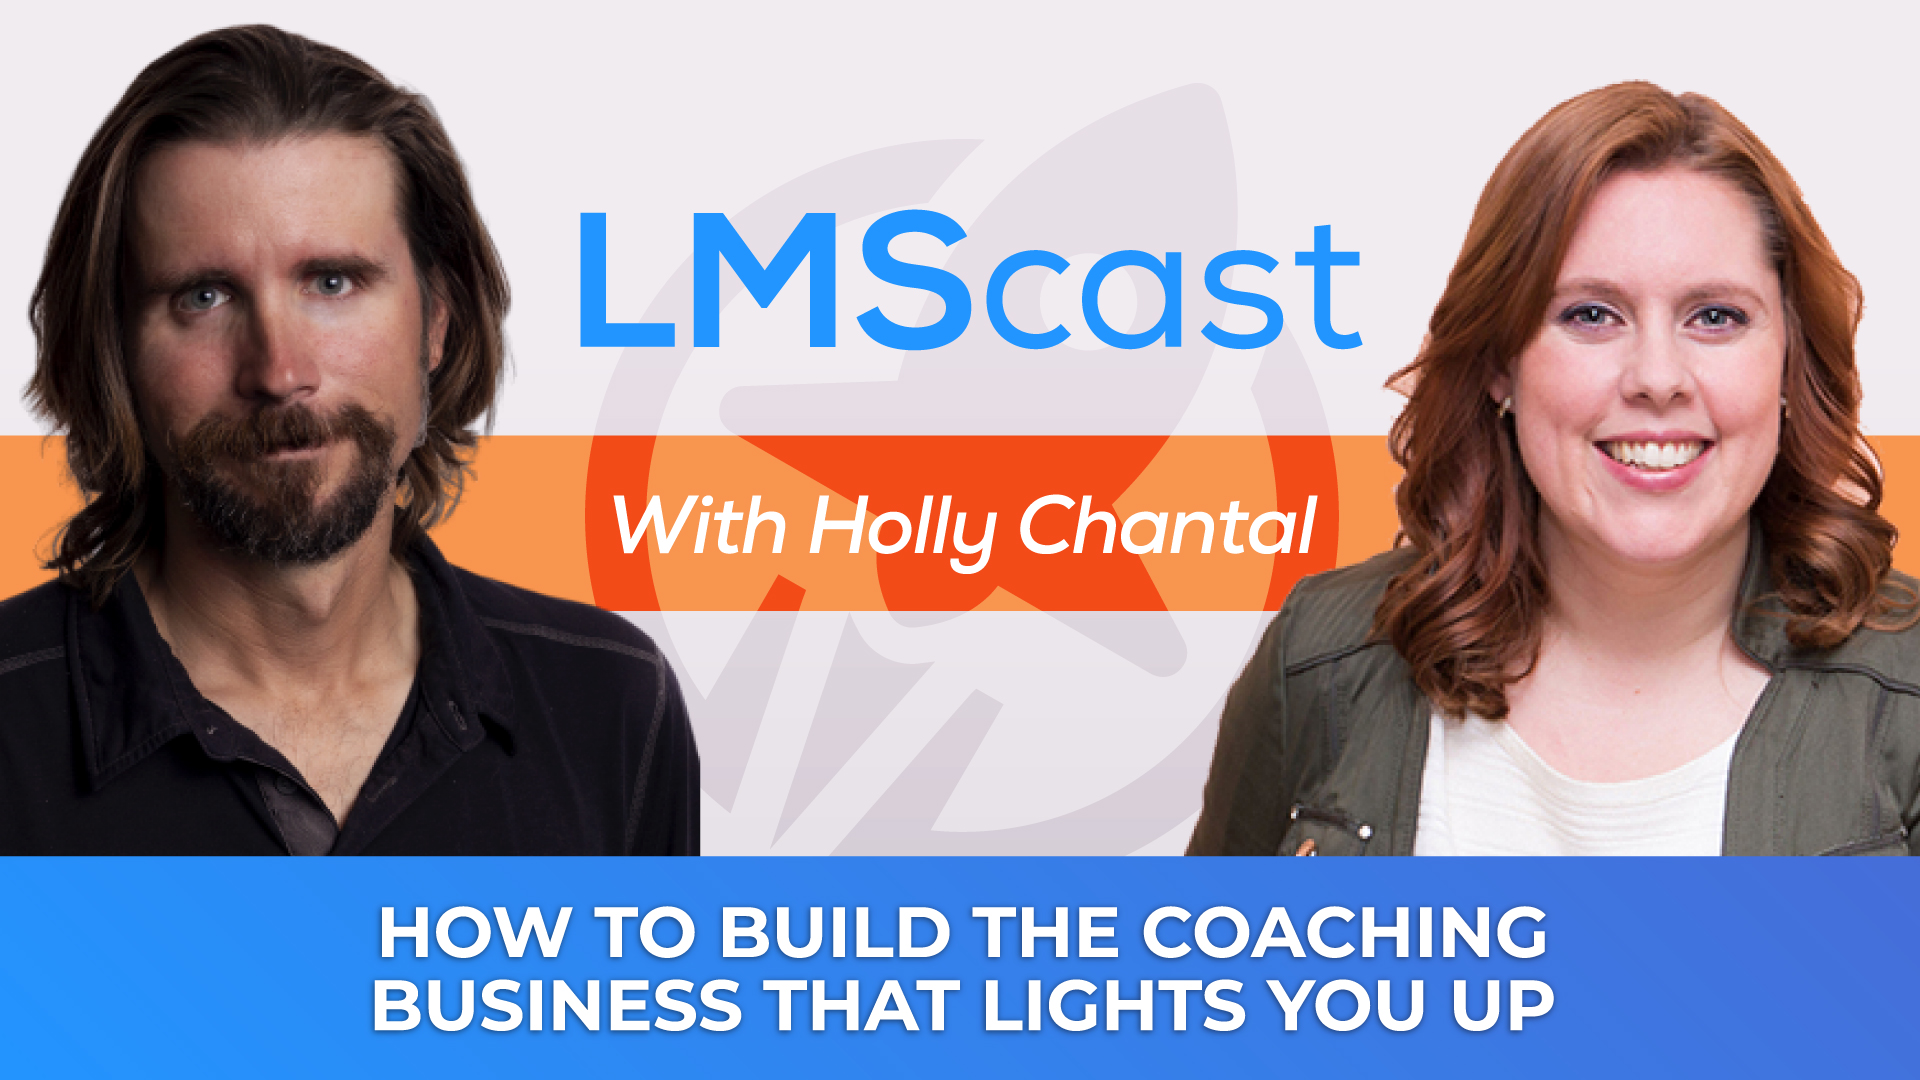 How to Build the Coaching Business that Lights You Up with Holly Chantal